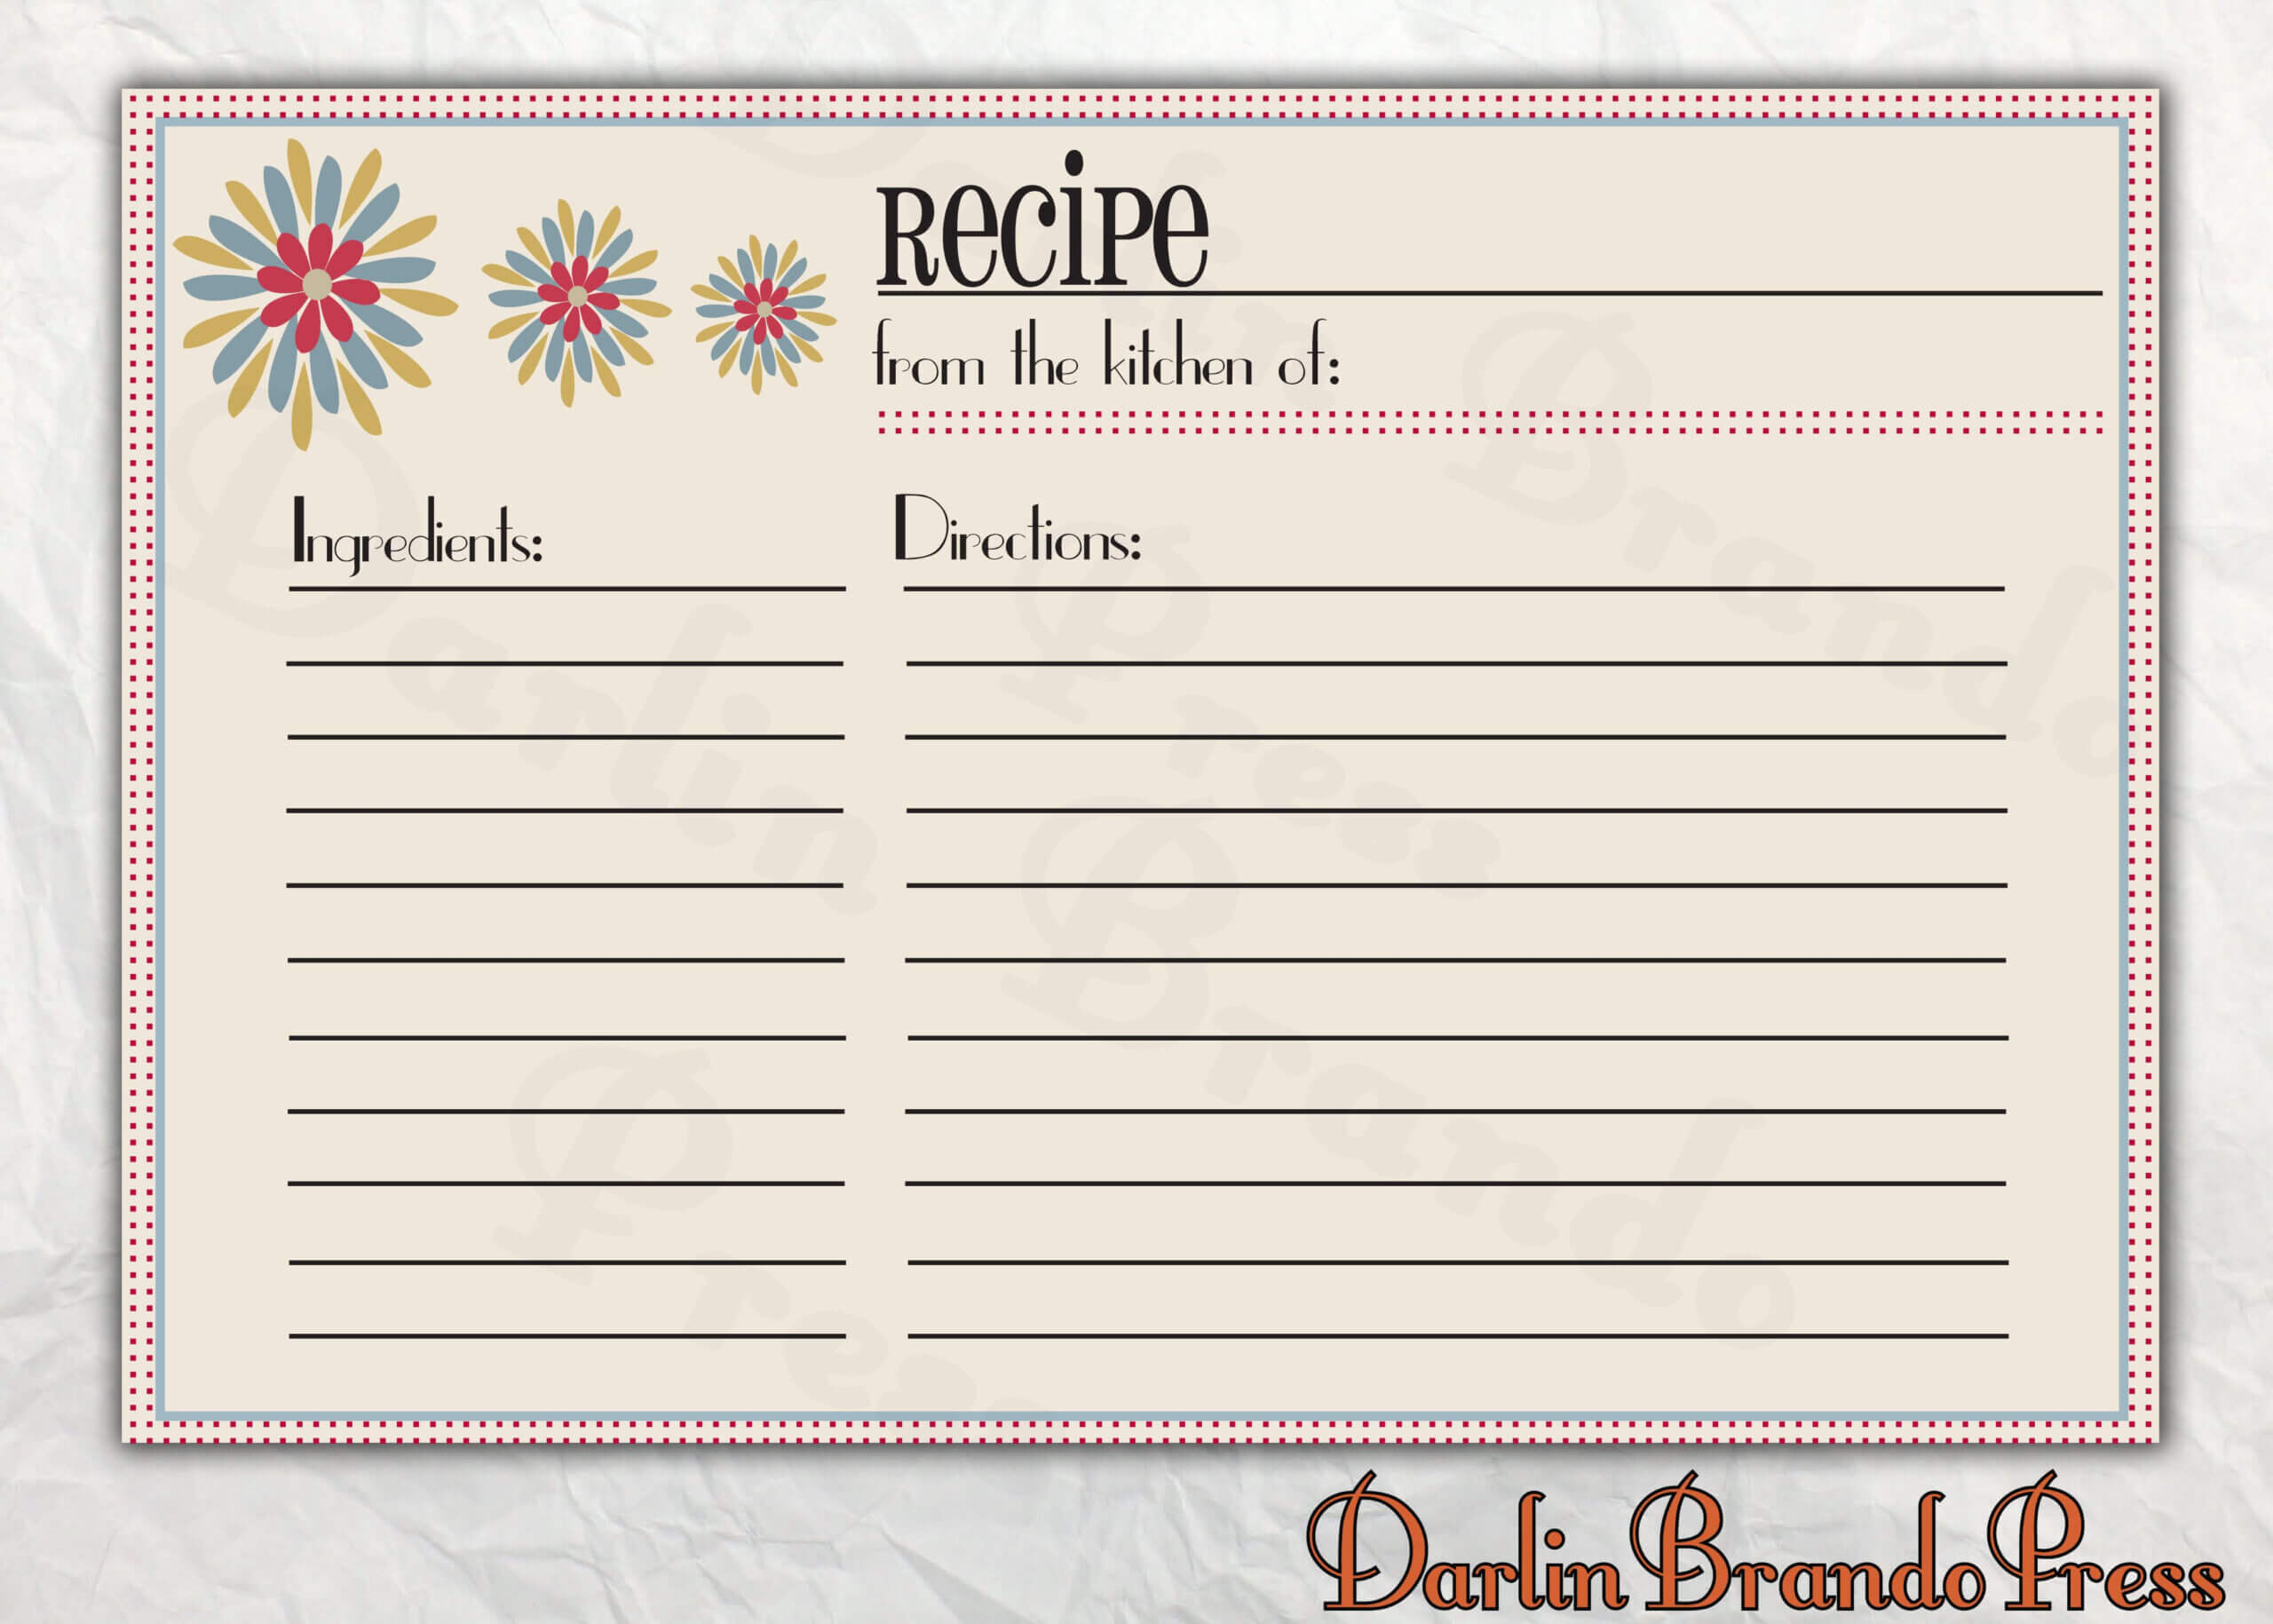 Recipes Card Templates Word | Recipe Template For Word Intended For Full Page Recipe Template For Word